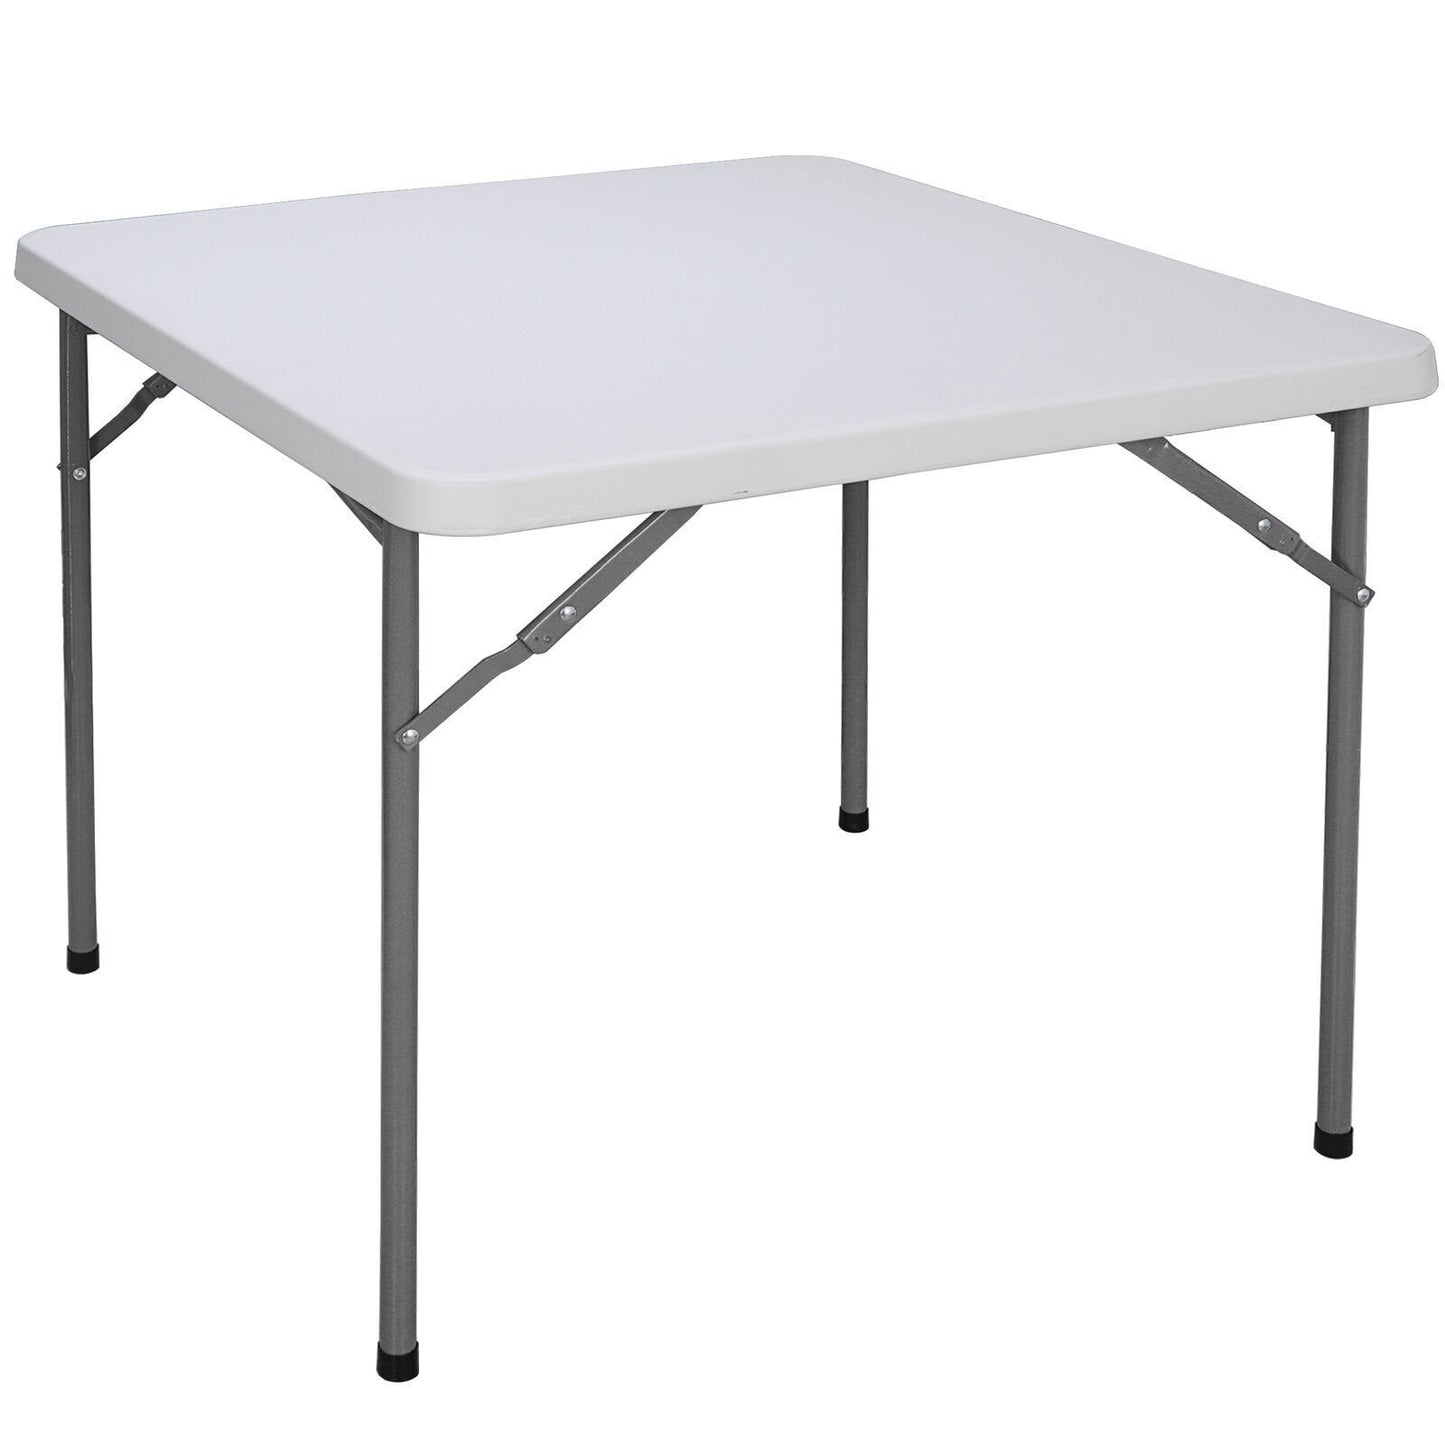 2PCS 3ft Folding Table Portable Indoor Outdoor Picnic Party Camping Tables